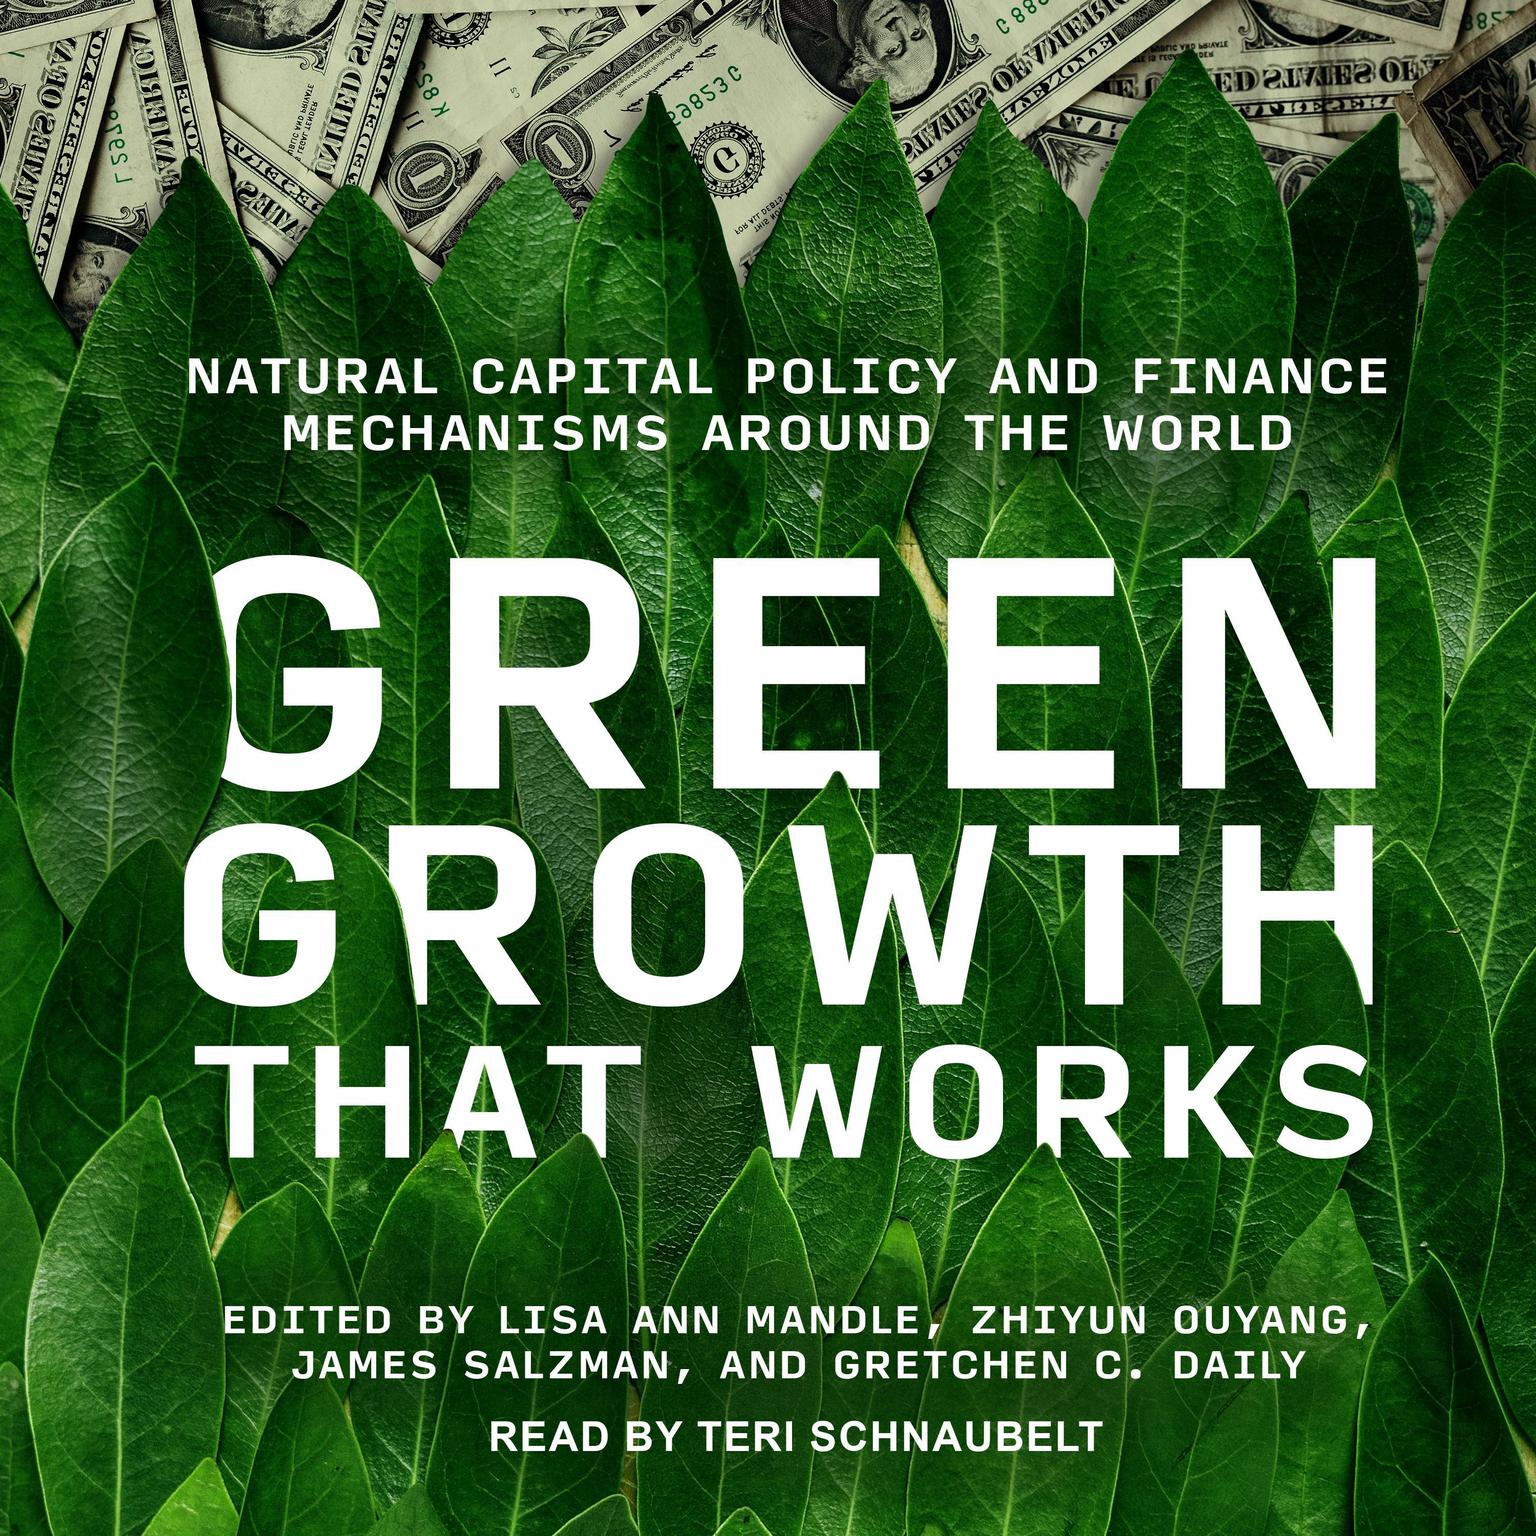 Green Growth That Works: Natural Capital Policy and Finance Mechanisms Around the World Audiobook, by James Salzman